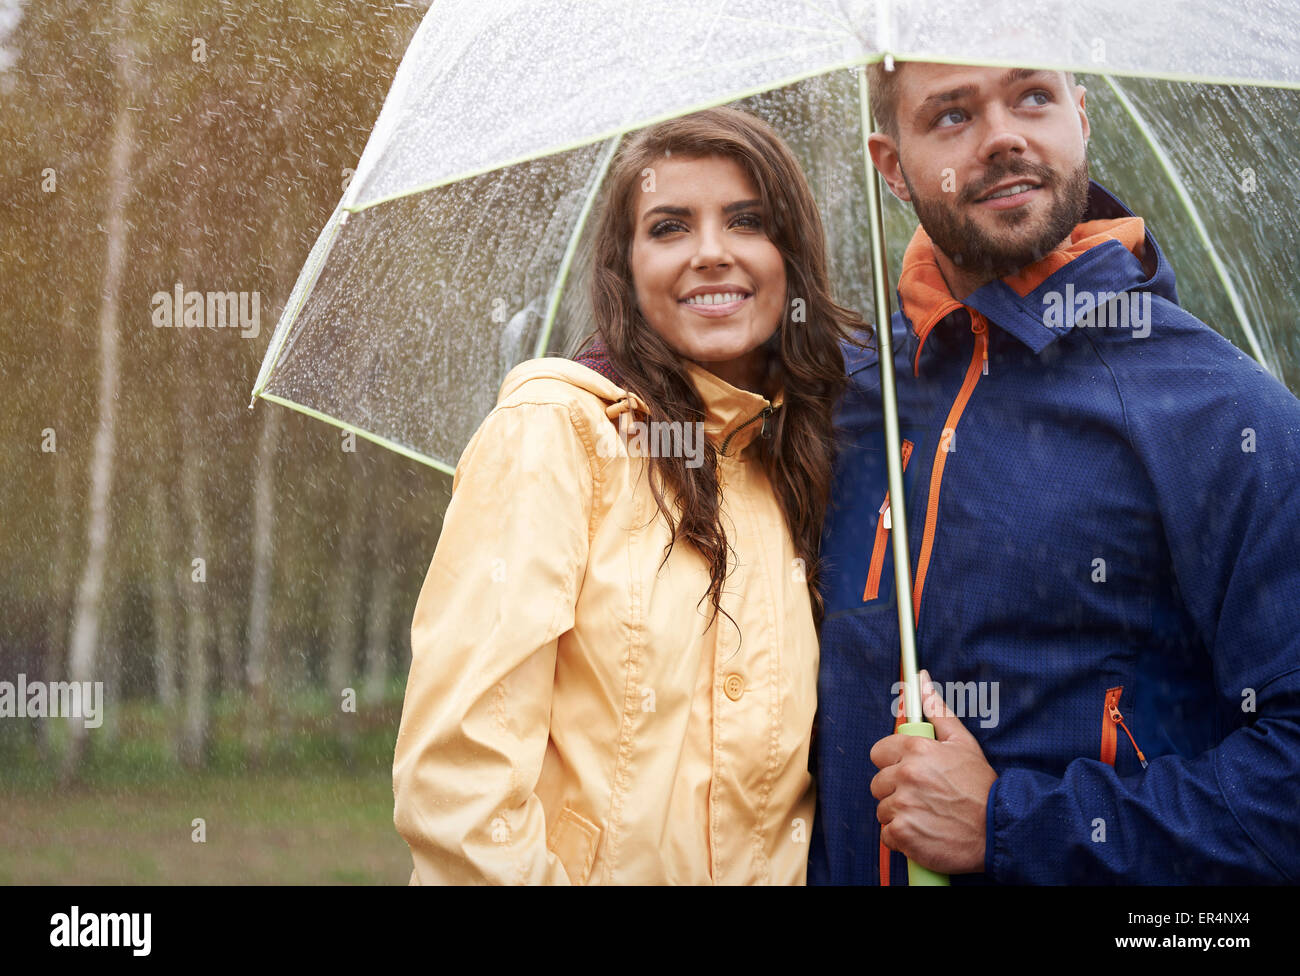 Warmed by love in rainy day. Debica, Poland Stock Photo